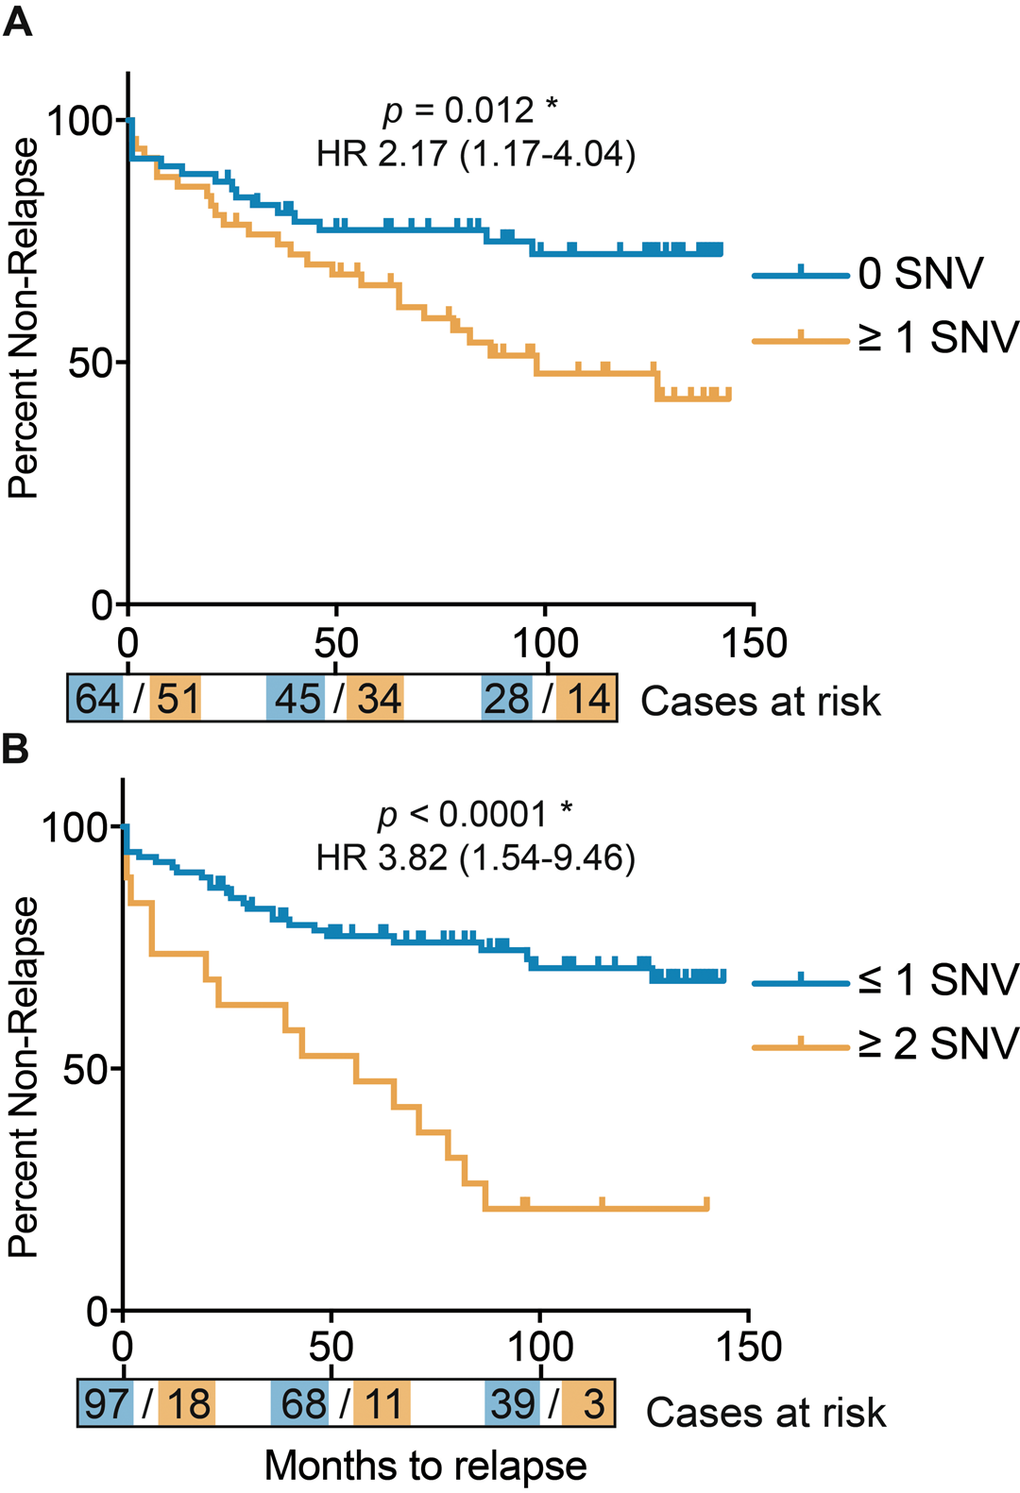 Kaplan Meier curves for disease relapse after surgery, defined by total number of mtDNA single nucleotide variants (SNVs). (A) Patients divided by zero or any mtDNA SNVs. (B) Patients divided by 2 or more and less than 2 mtDNA SNVs. Time in months, with number of cases per mtNDA SNV category represented at time-points 0, 50 and 100 months.